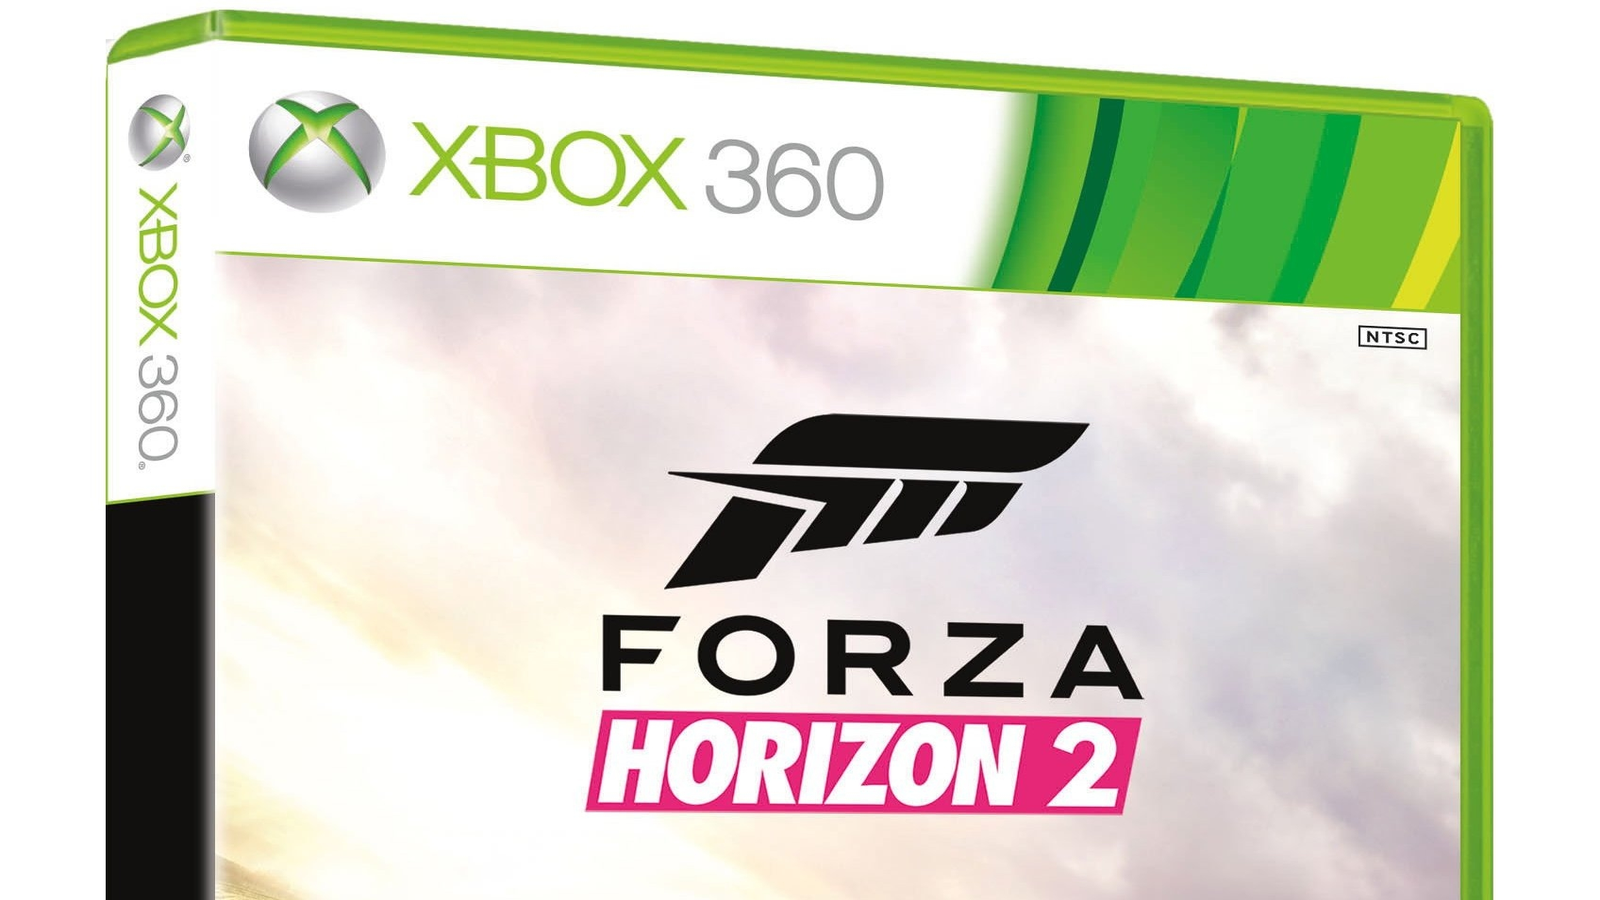 MGR Racing - Xbox & Games Industry - Official Forza Community Forums